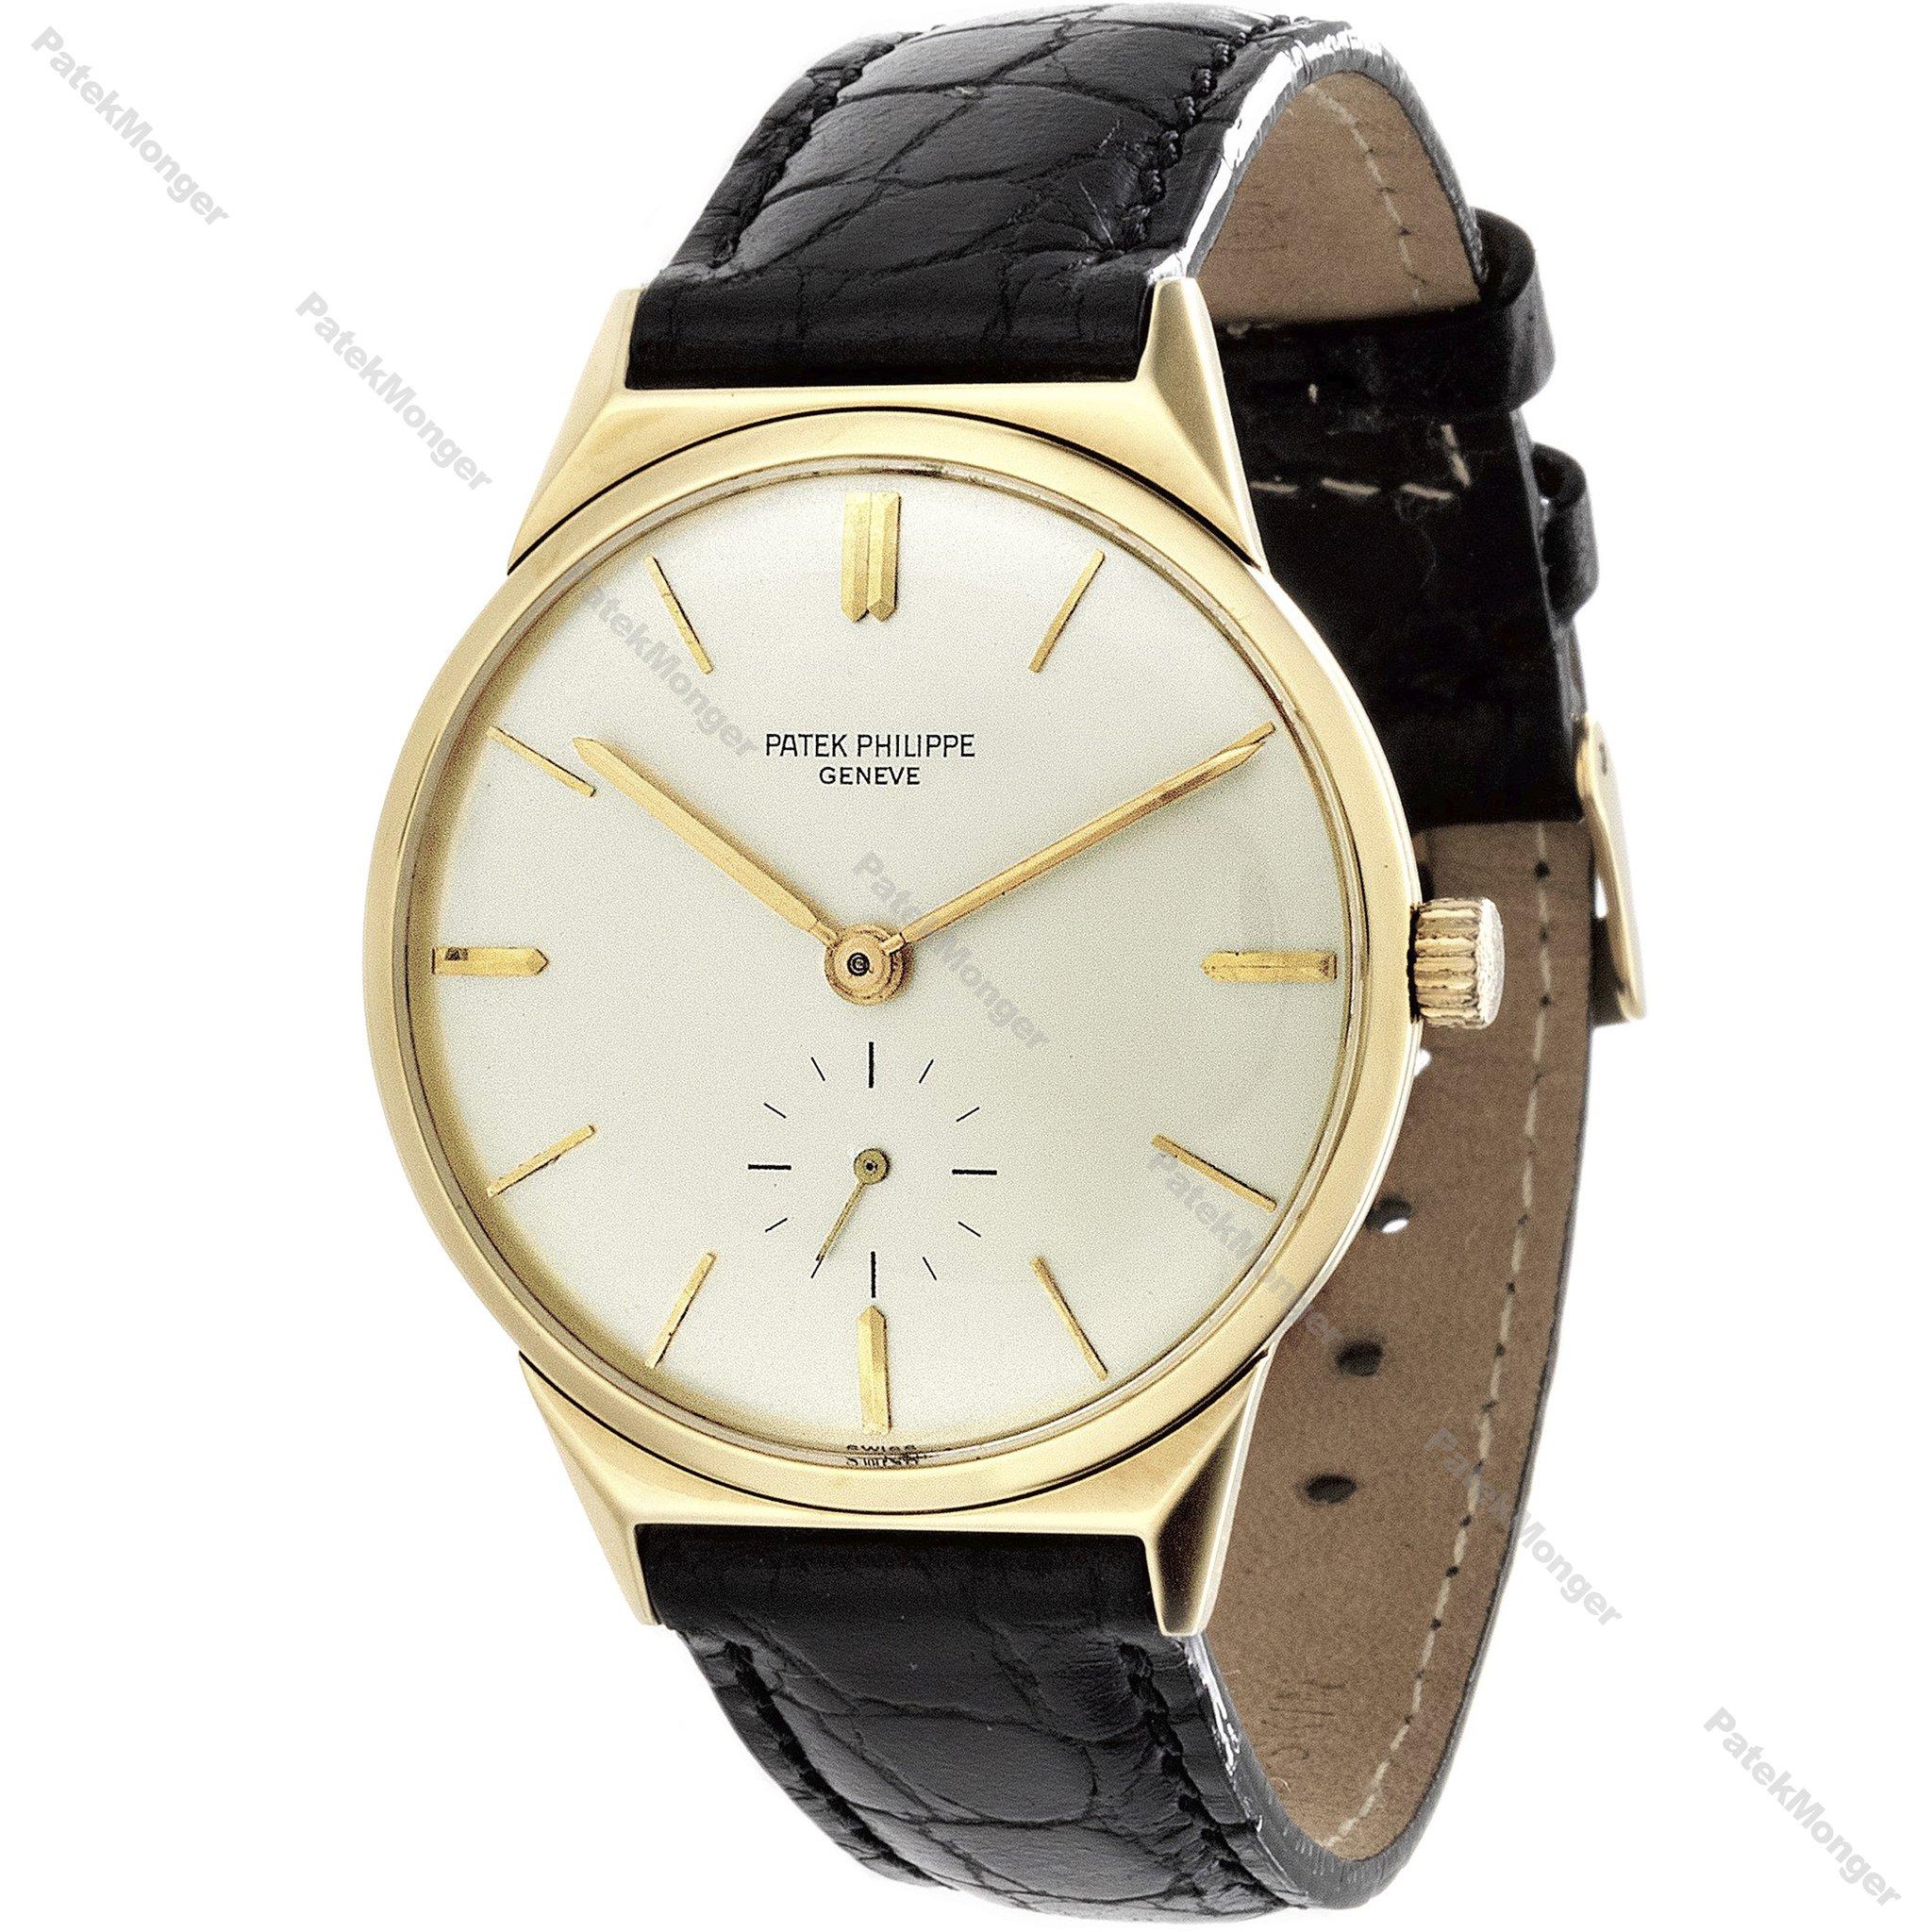 Introduction:
This Patek Philippe 2568J Calatrava watch has faceted lugs and a 33 mm case.  The watch is made in 18K Yellow Gold with a 10